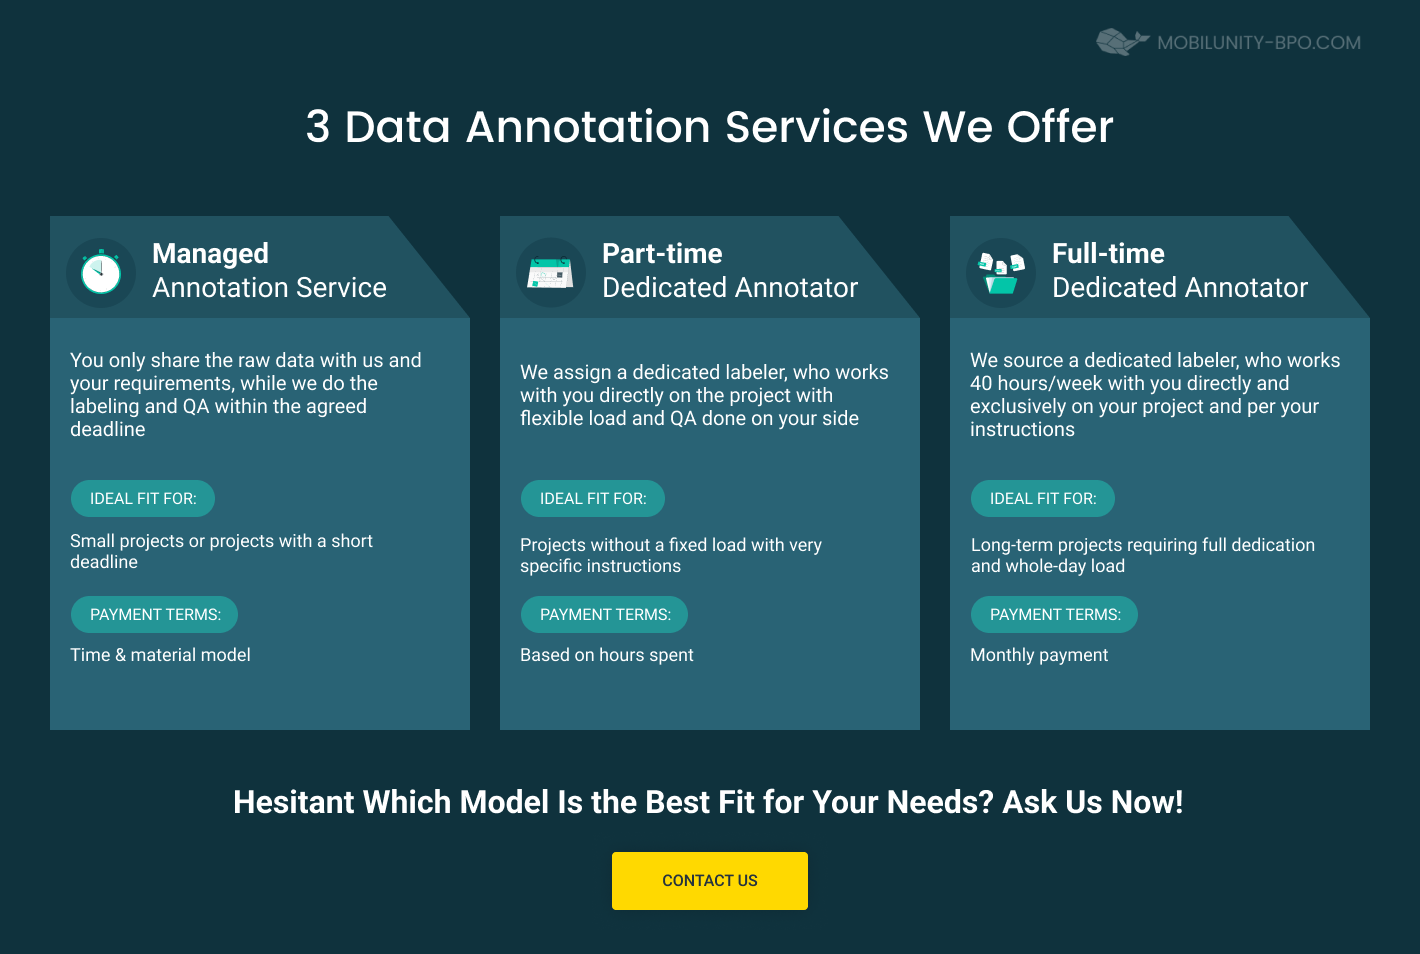 Data Annotation Services Offered by Mobilunity-BPO